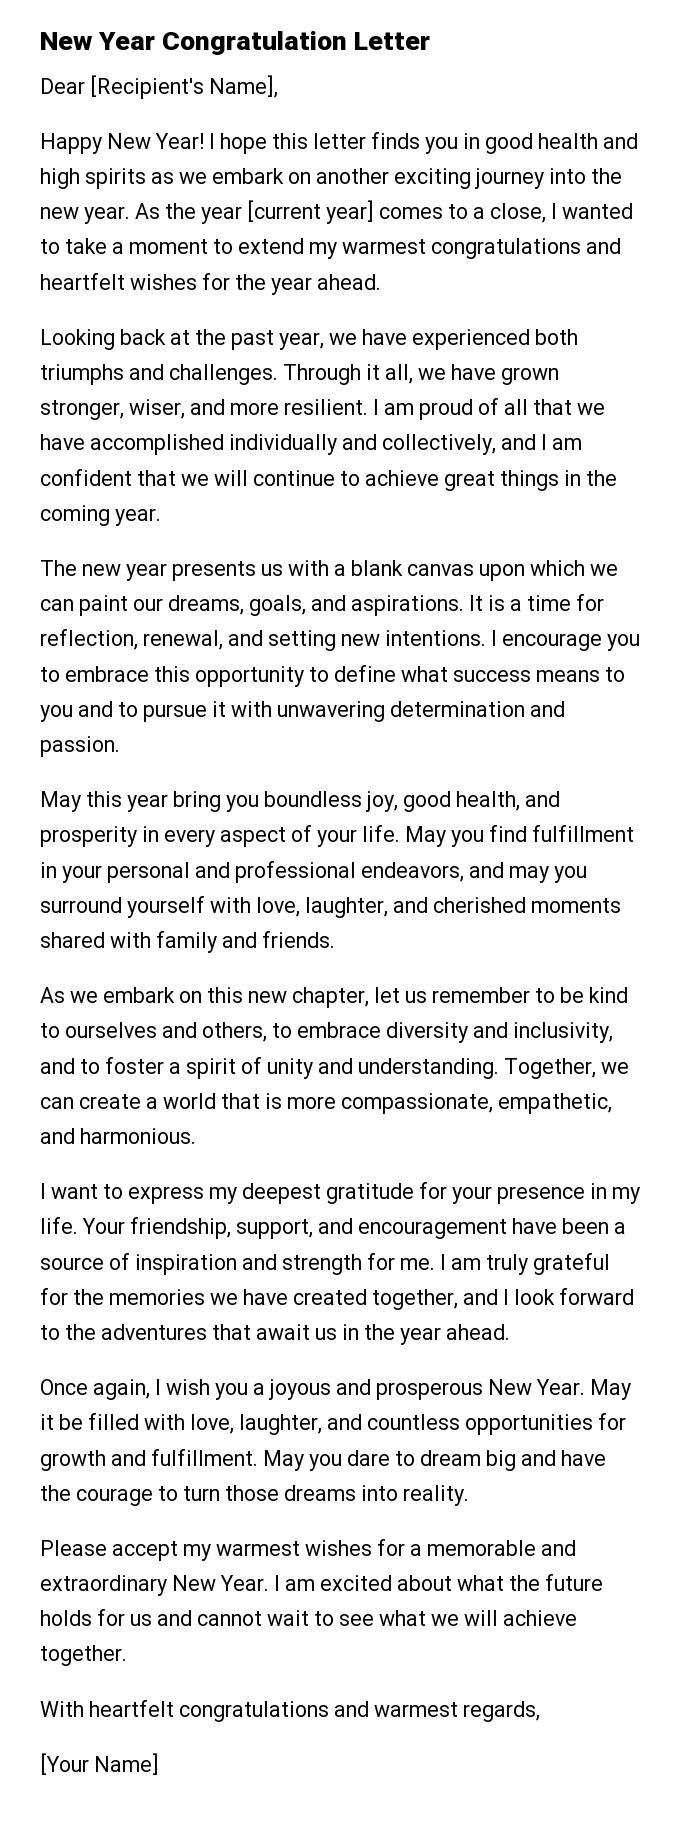 New Year Congratulation Letter